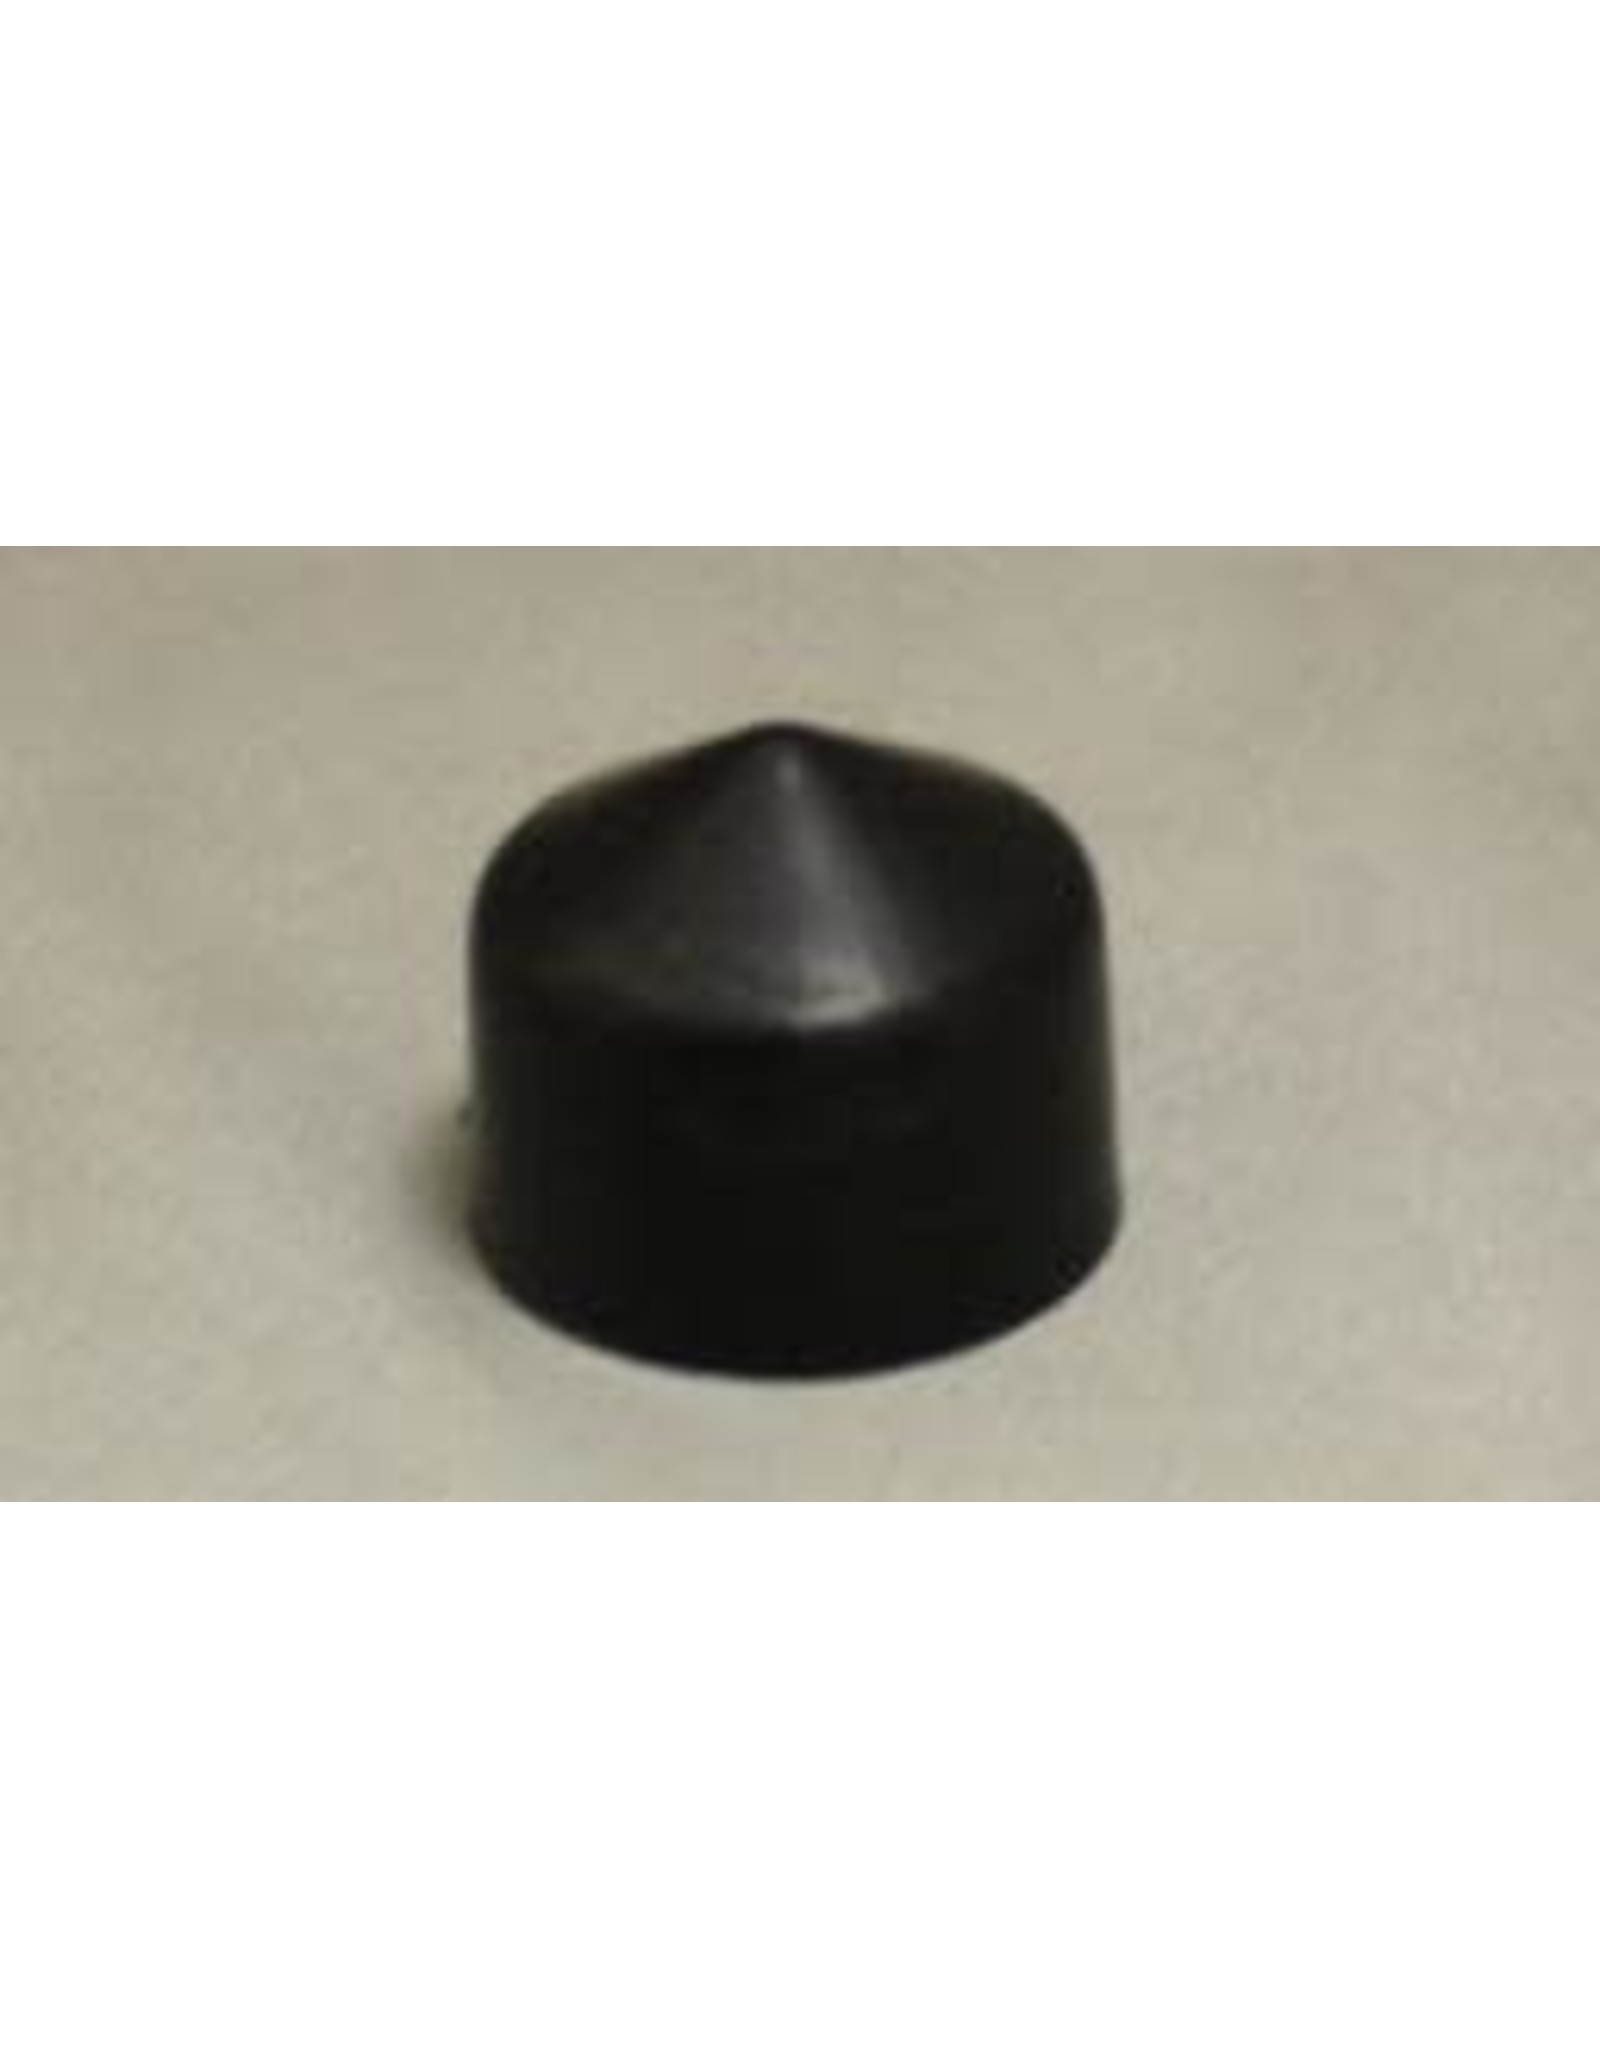 Auto Siphon Replacement tip 1/2"